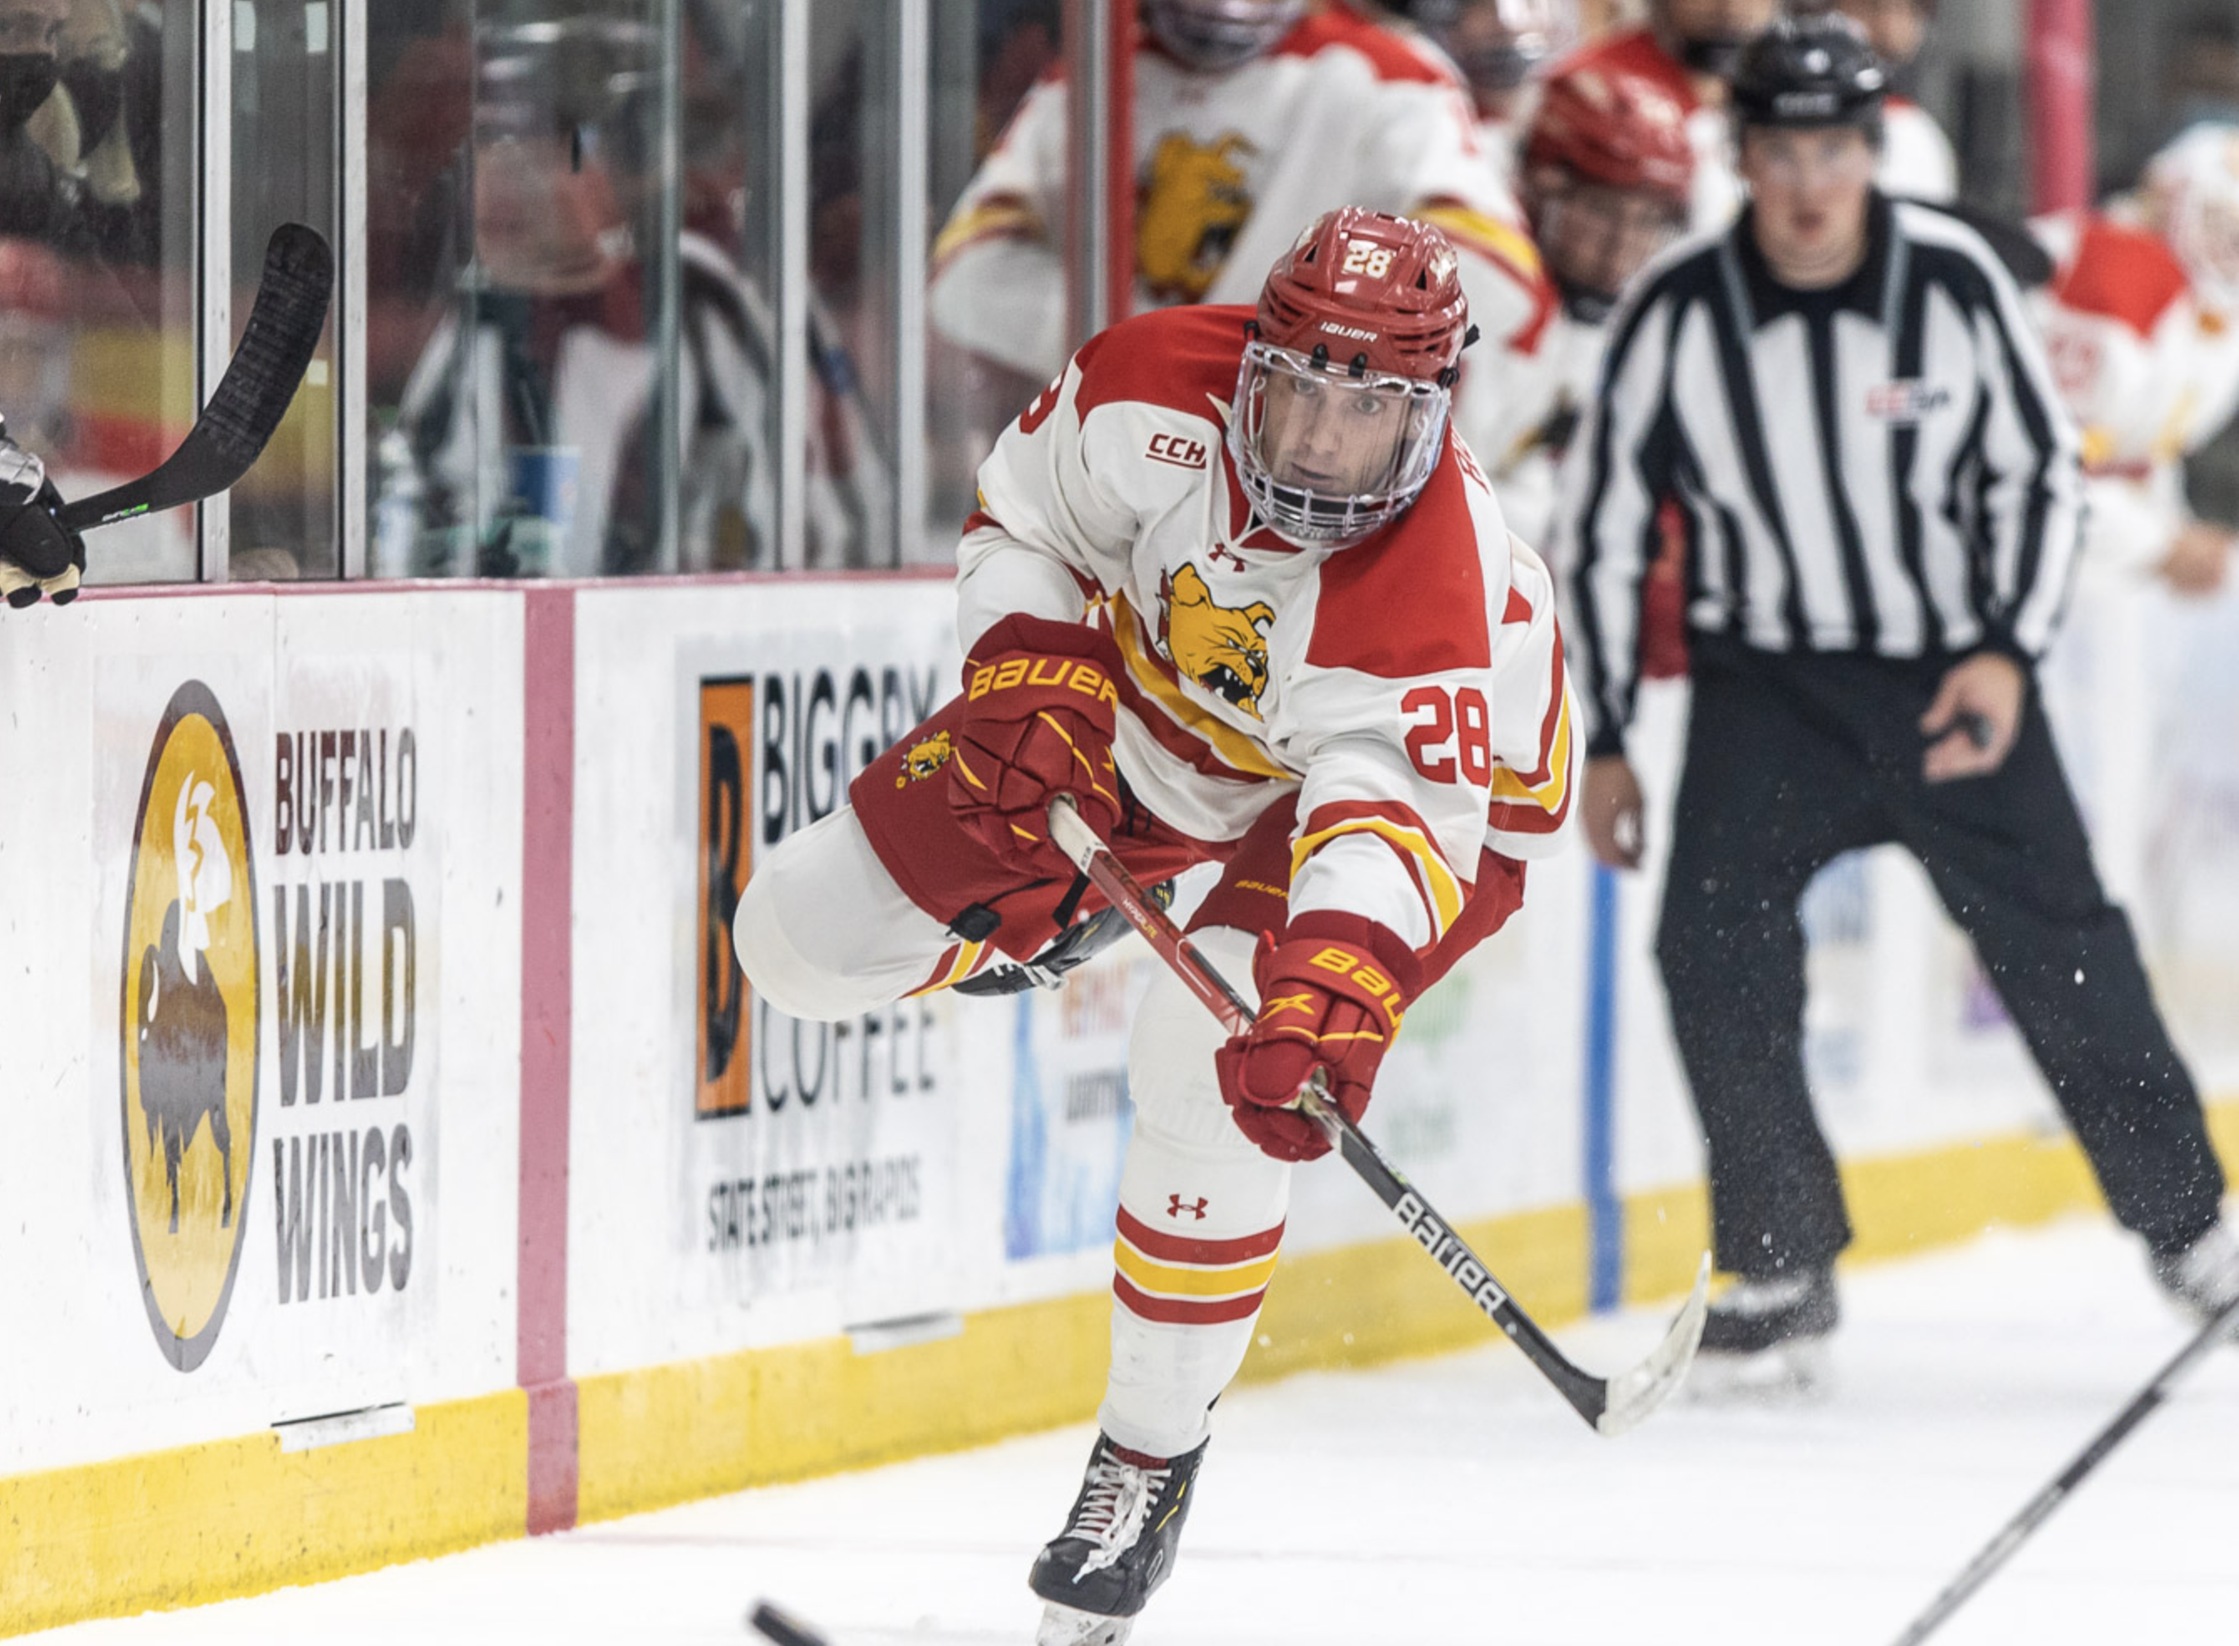 Rons Scores Twice But Bulldogs Fall To Wildcats In Return To CCHA Play